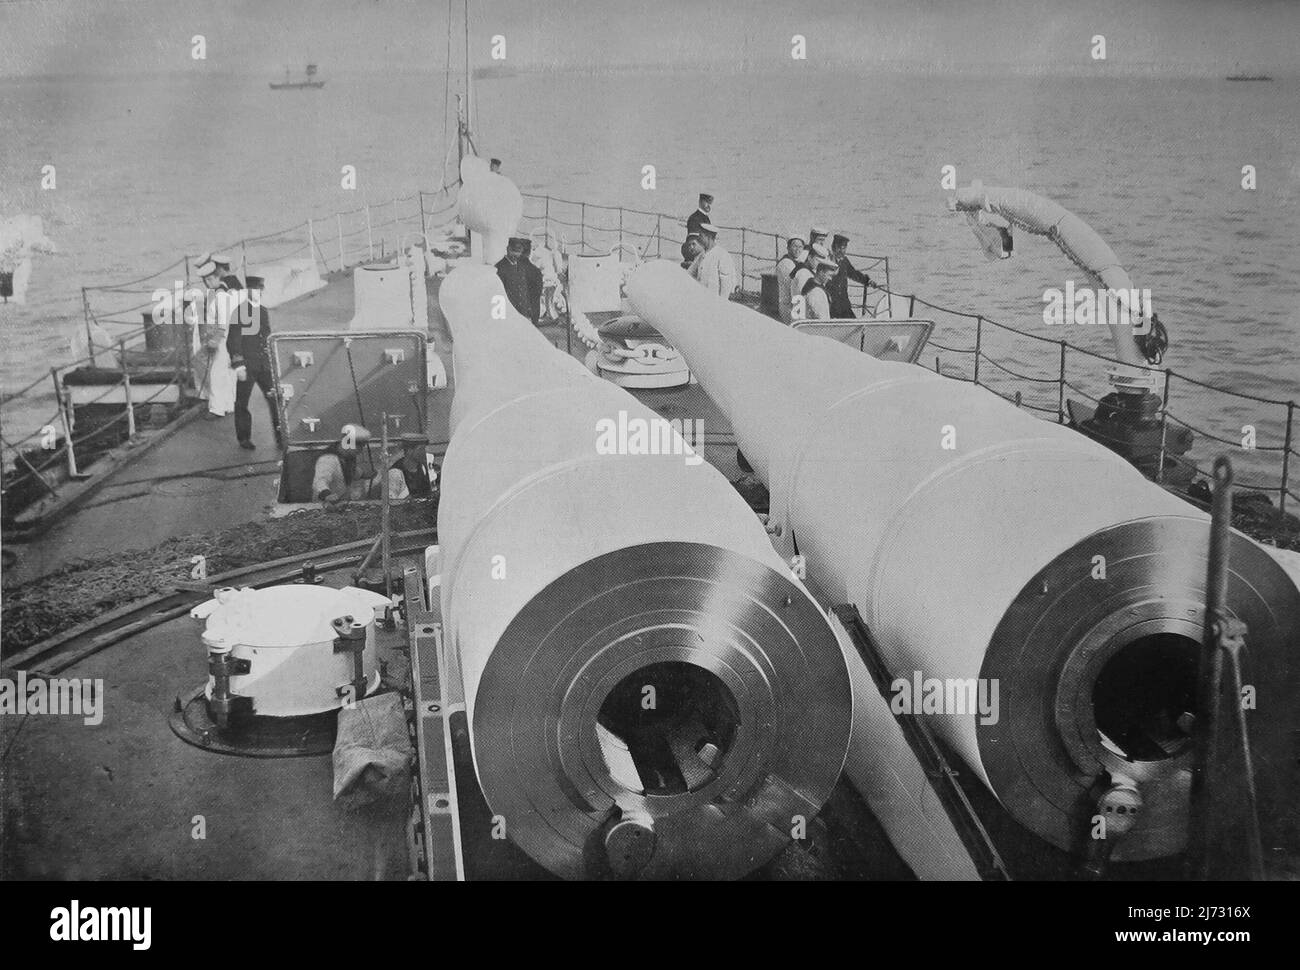 Looking forward on board the pre-dreadnought battleship, H.M.S. Royal Sovereign. Taken at Spithead in November 1894. The photograph was taken from the fore bridge and shows the tow 67-ton guns mounted in the forward barbette. Stock Photo